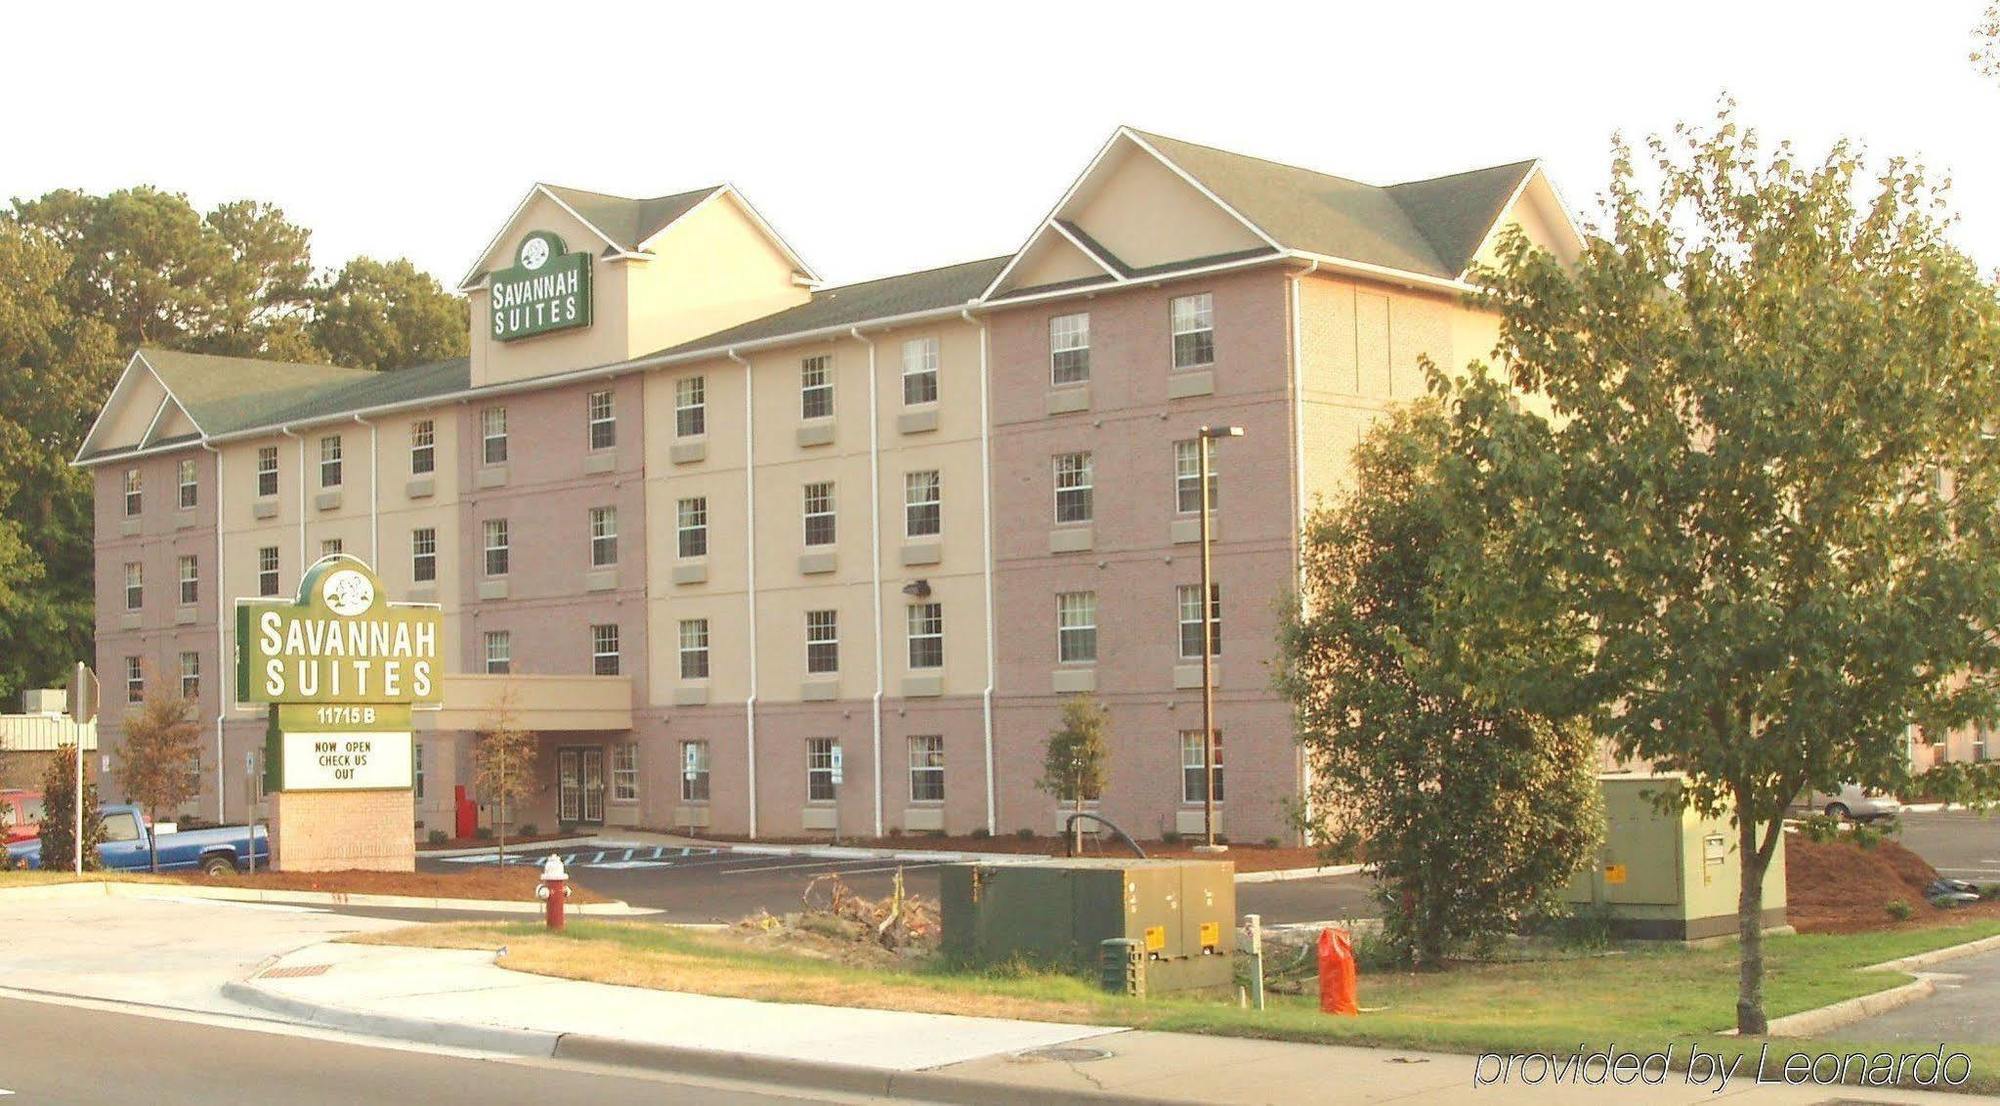 Intown Suites Extended Stay Newport News Va - City Center Екстериор снимка